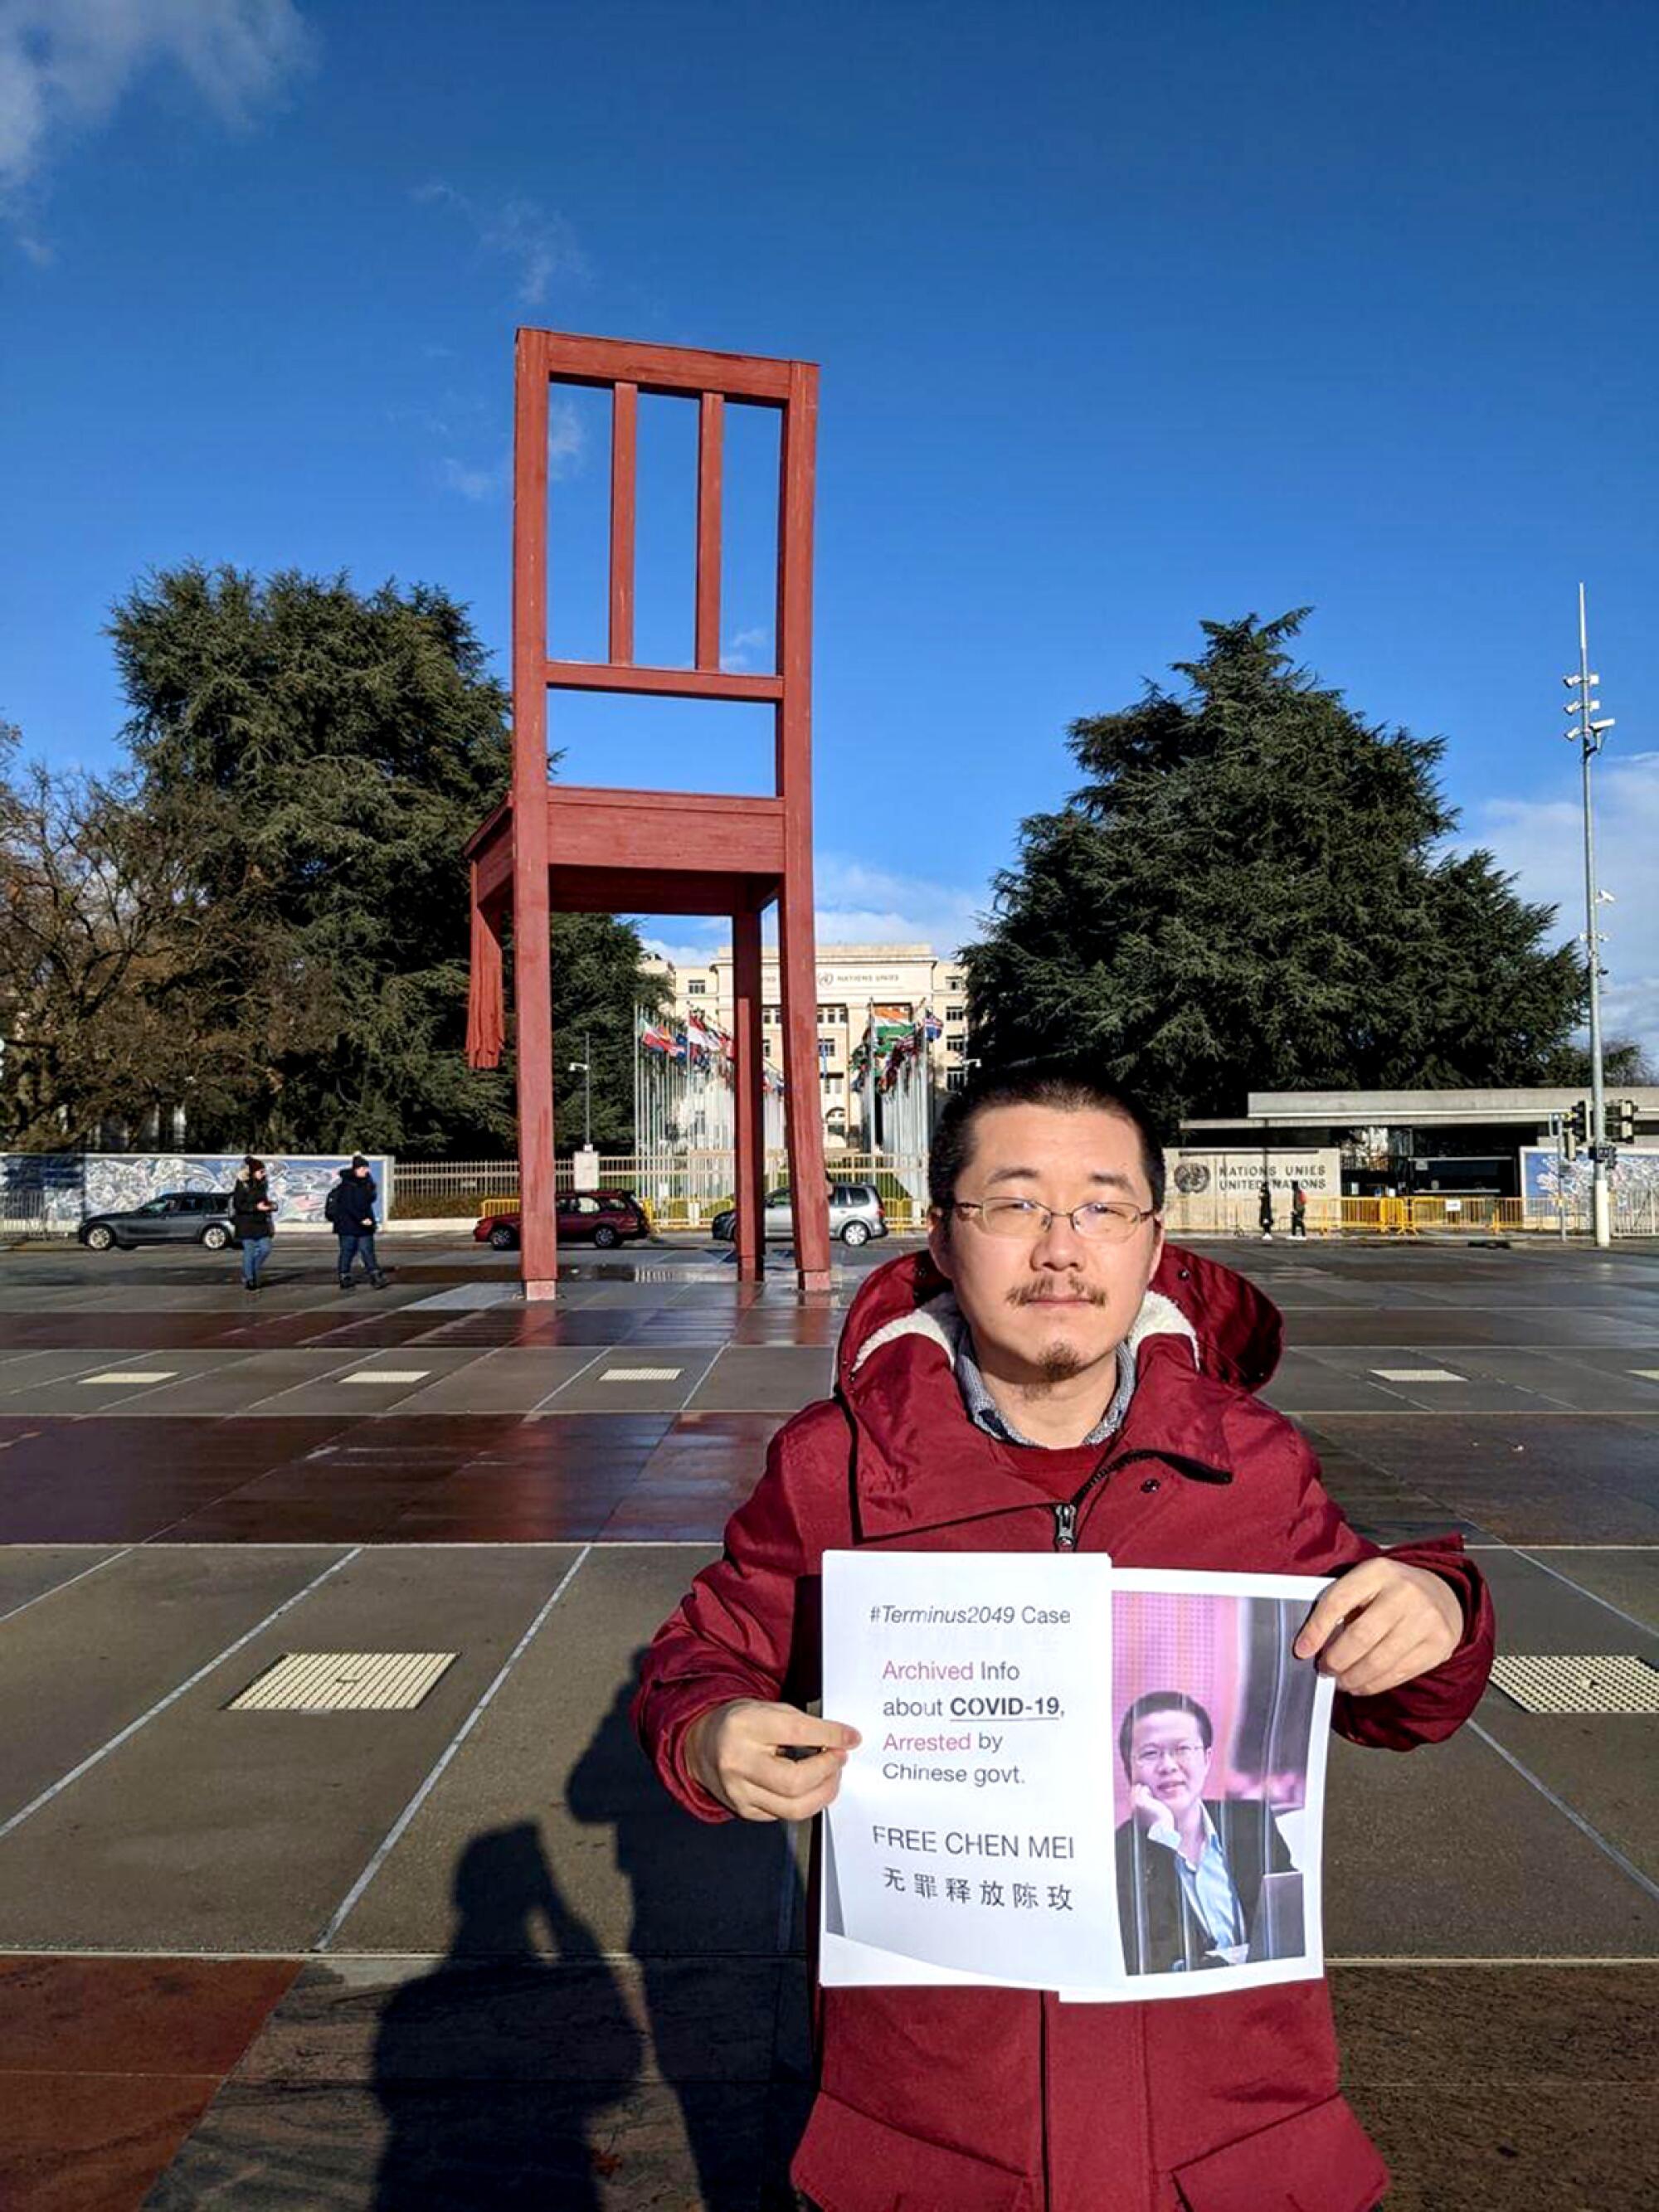 A man standing in front of a red sculpture of a chair holds a printed image of a person and a sign that reads Free Chen Mei
